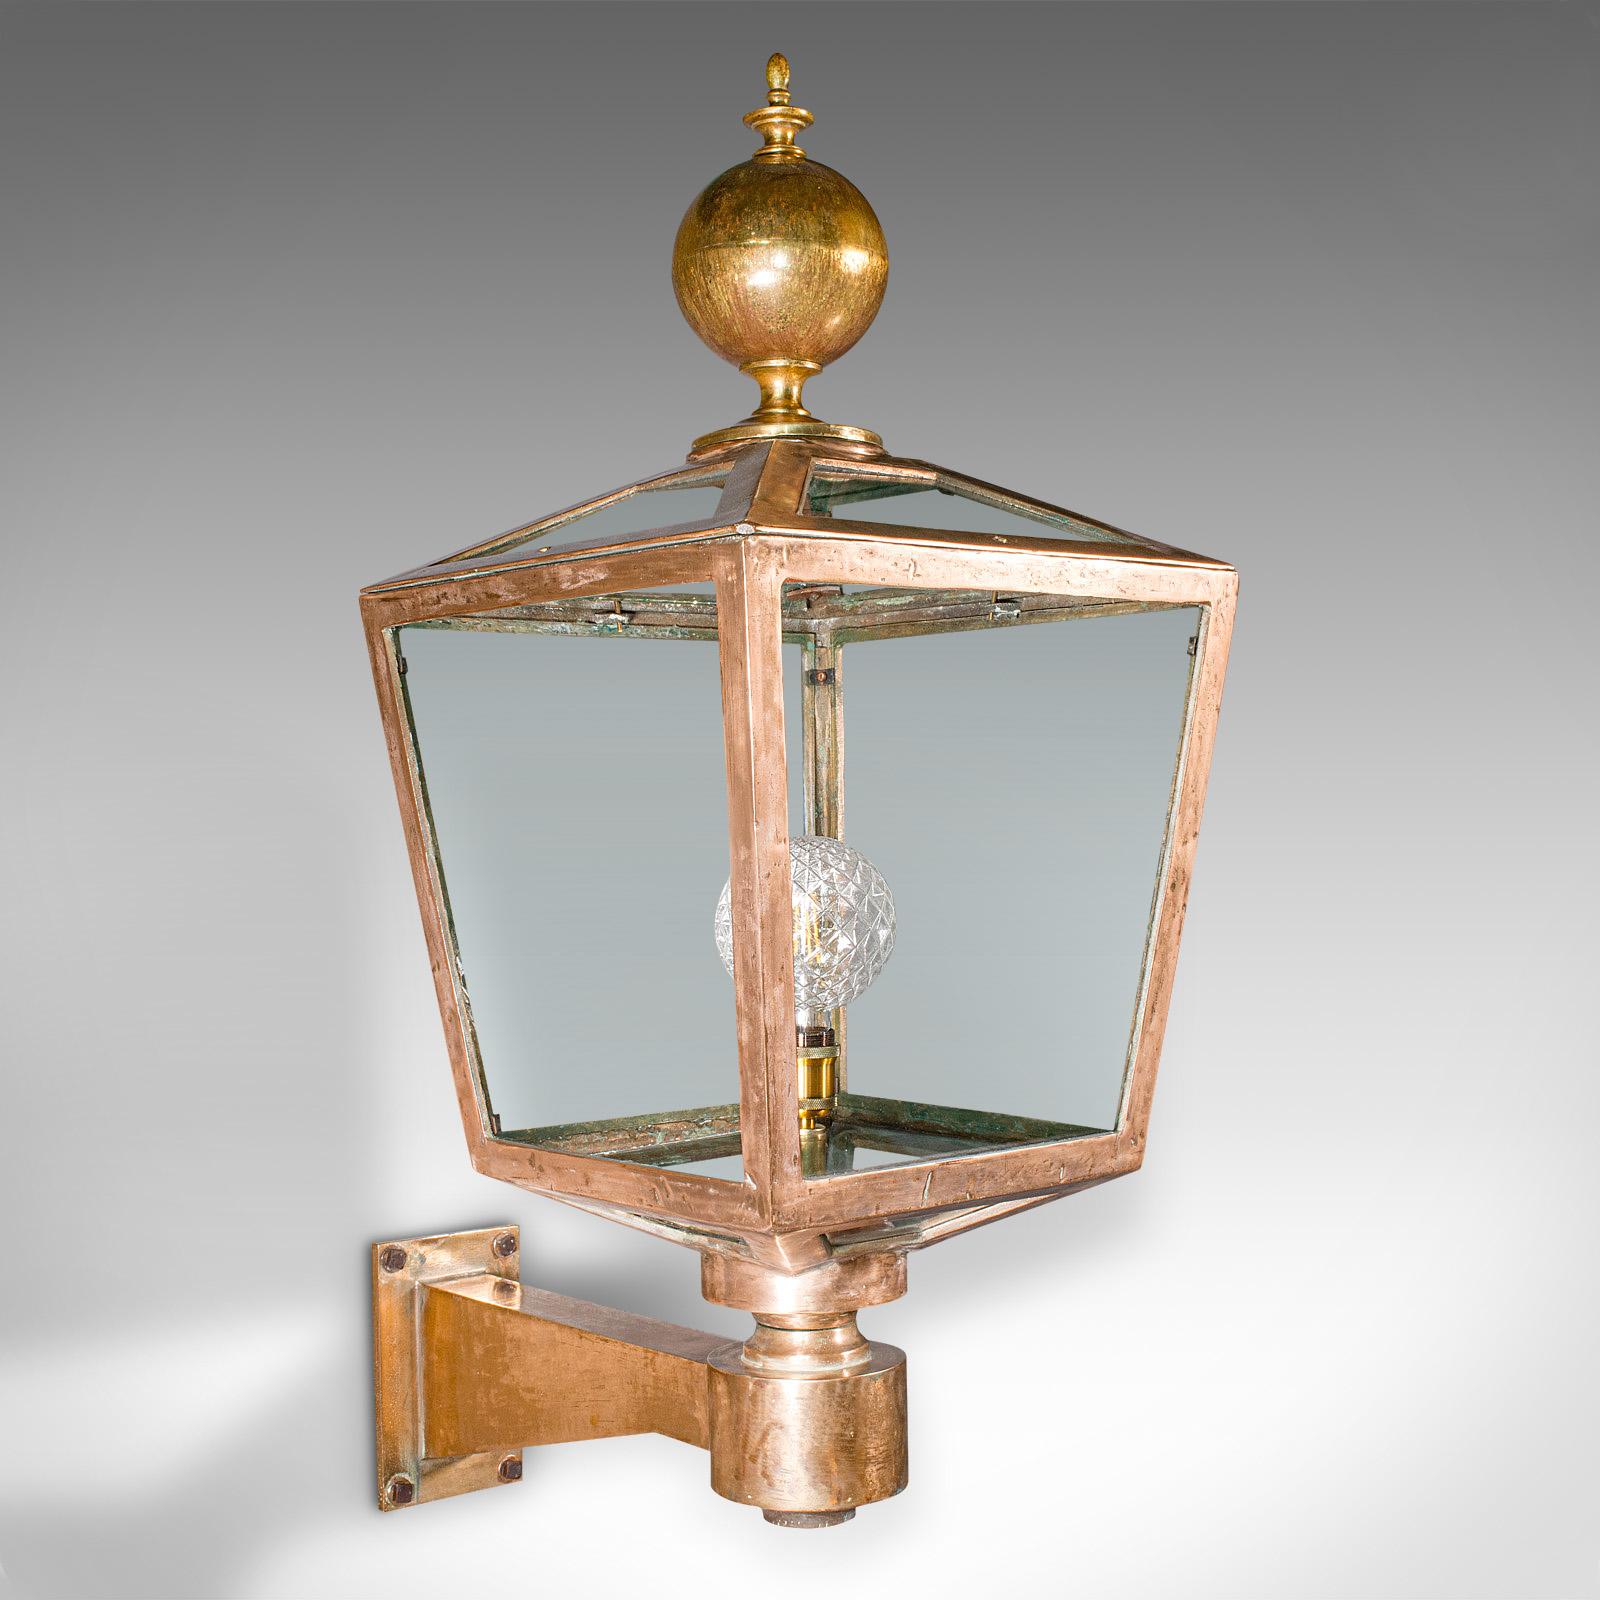 
This is a monumental antique courtyard light. An English, bronze and glass outdoor lamp fixture, dating to the Victorian period, circa 1870.

Strikingly substantial and impressive form, ideal for a country house residence
Displays a desirable aged